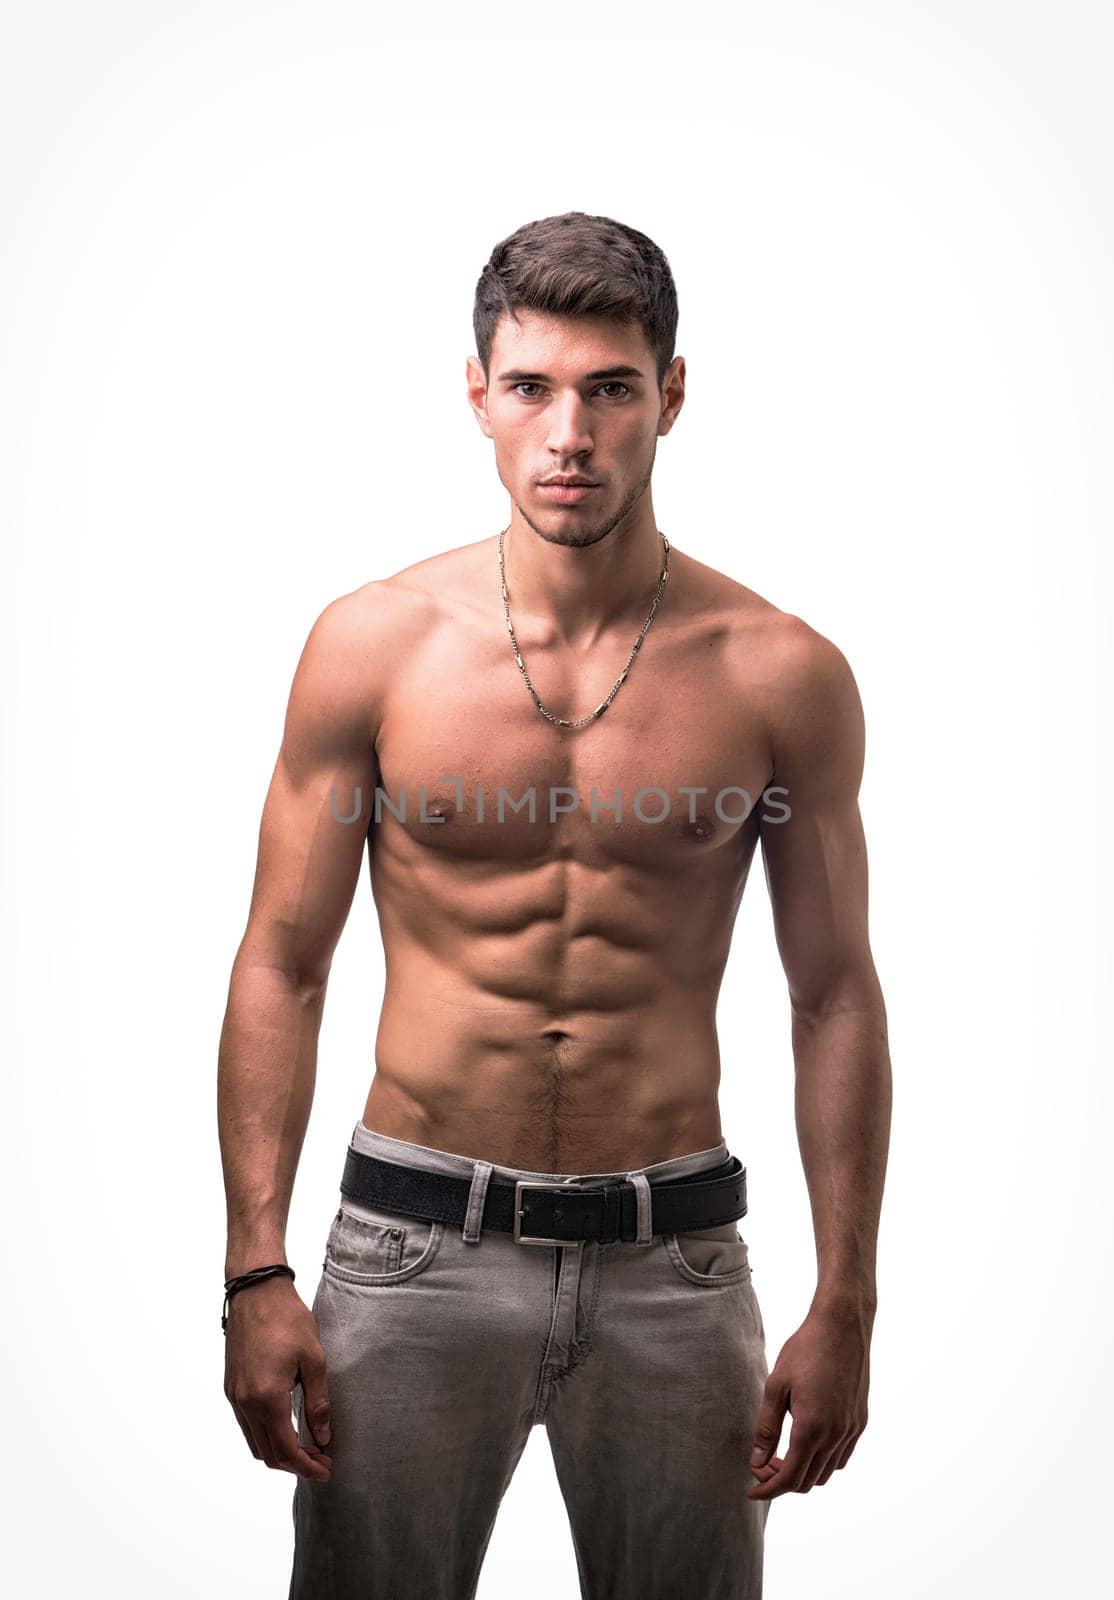 A shirtless handsome young man posing for a picture showing muscular torso, looking at camera, wearing grey jeans